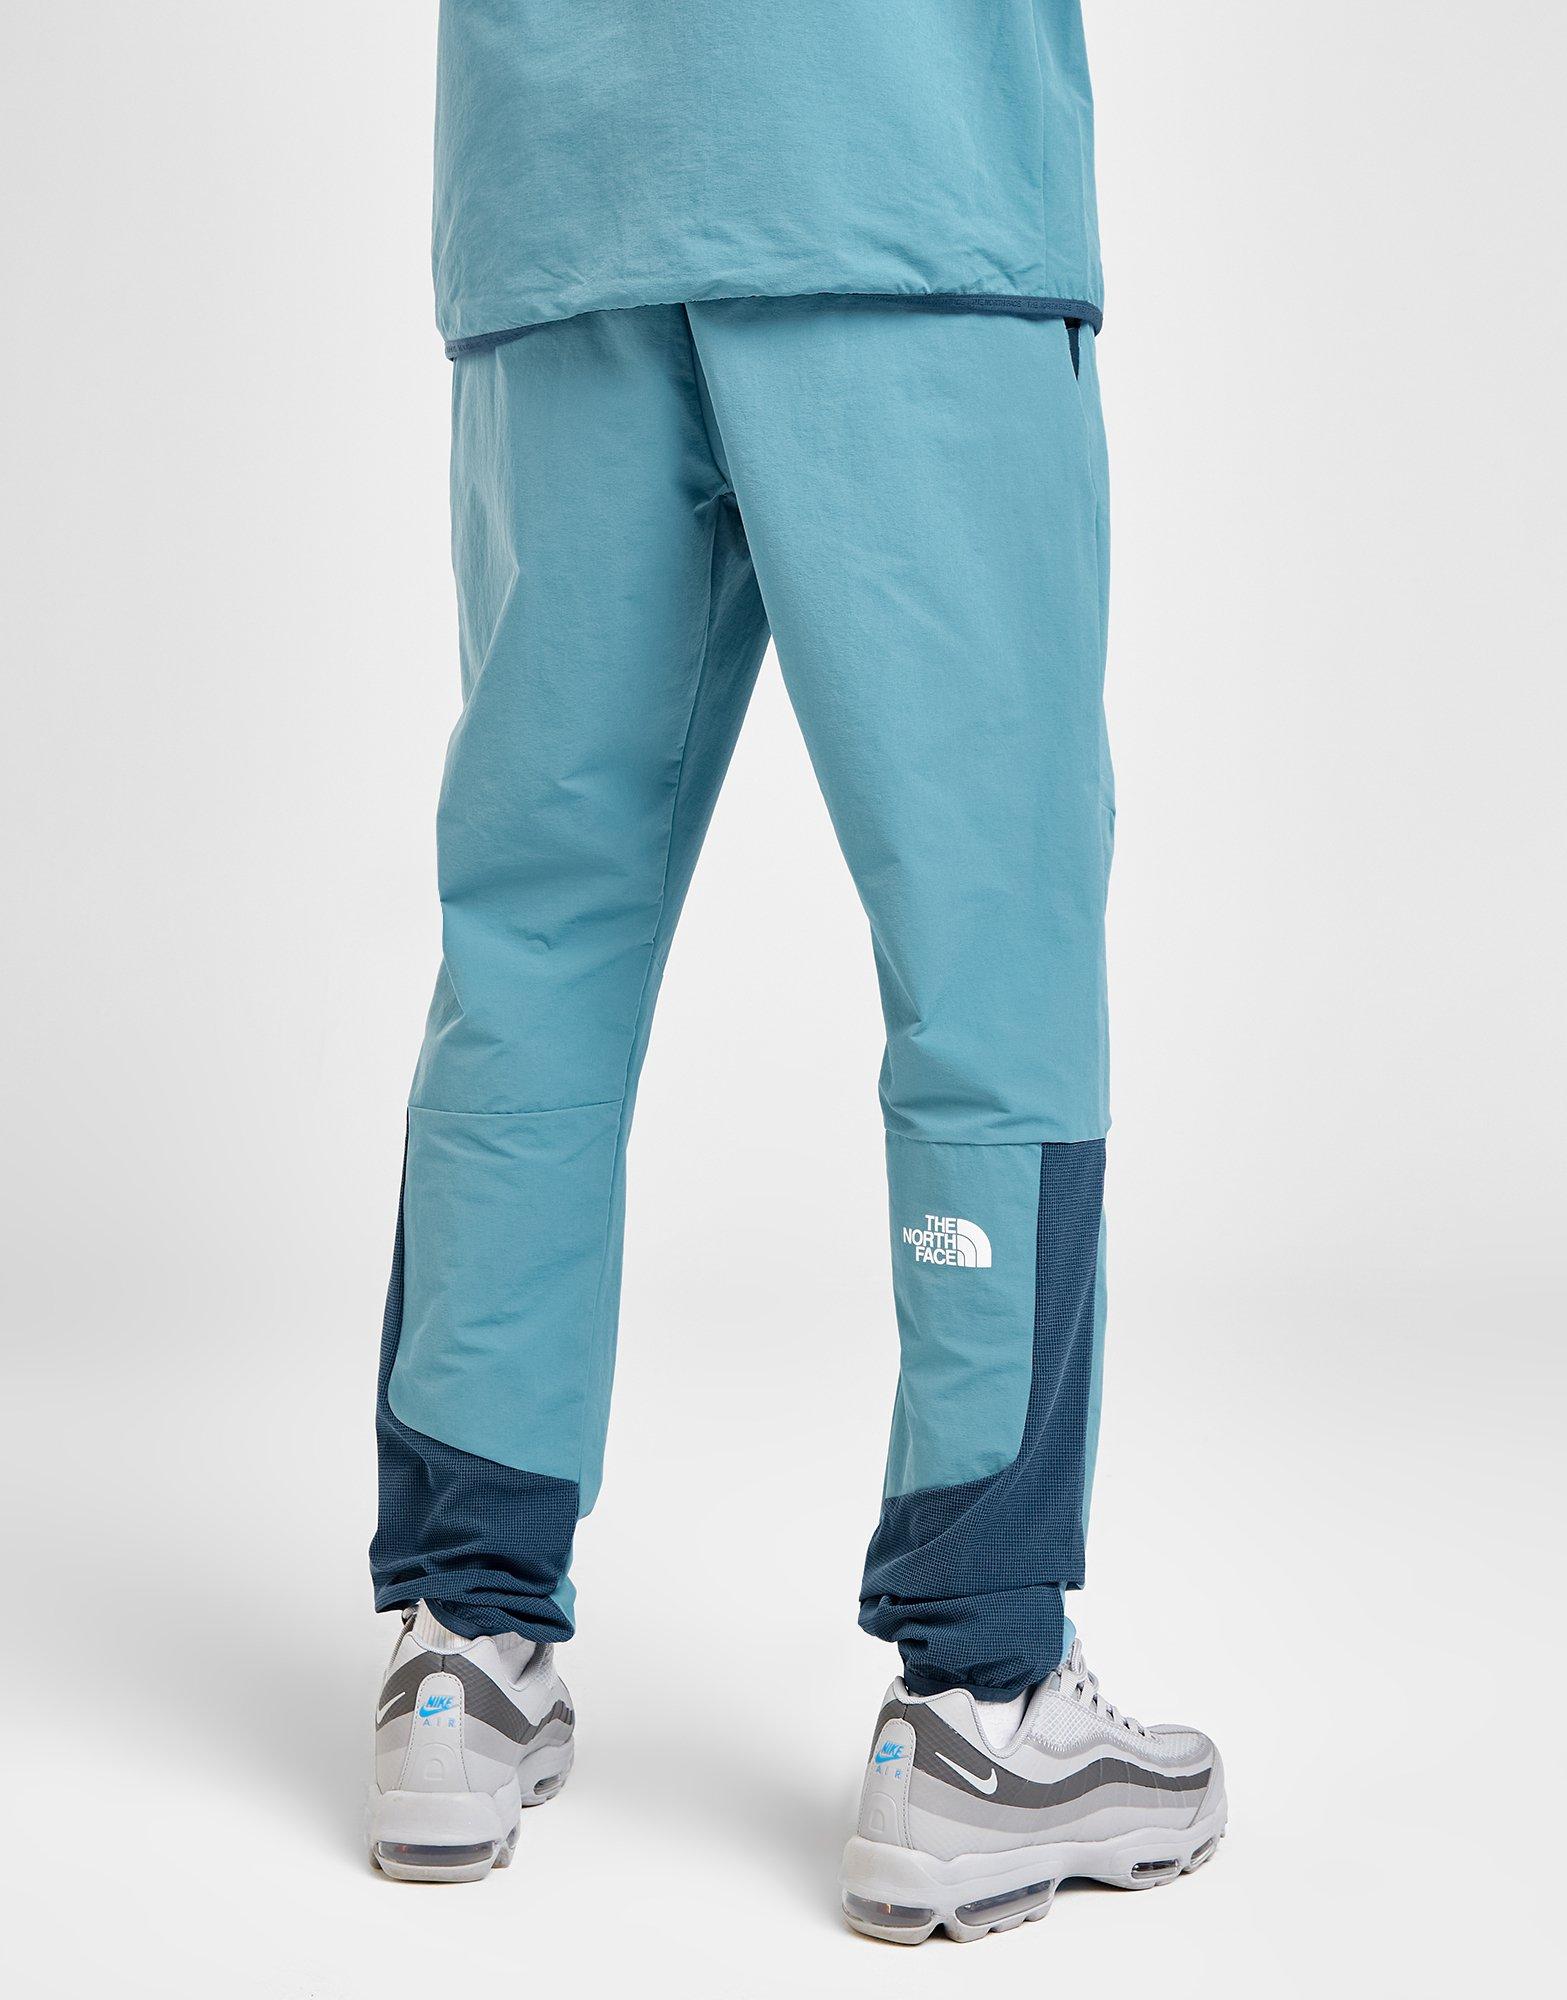 North Face Performance Woven Track Pants | JD Sports Global